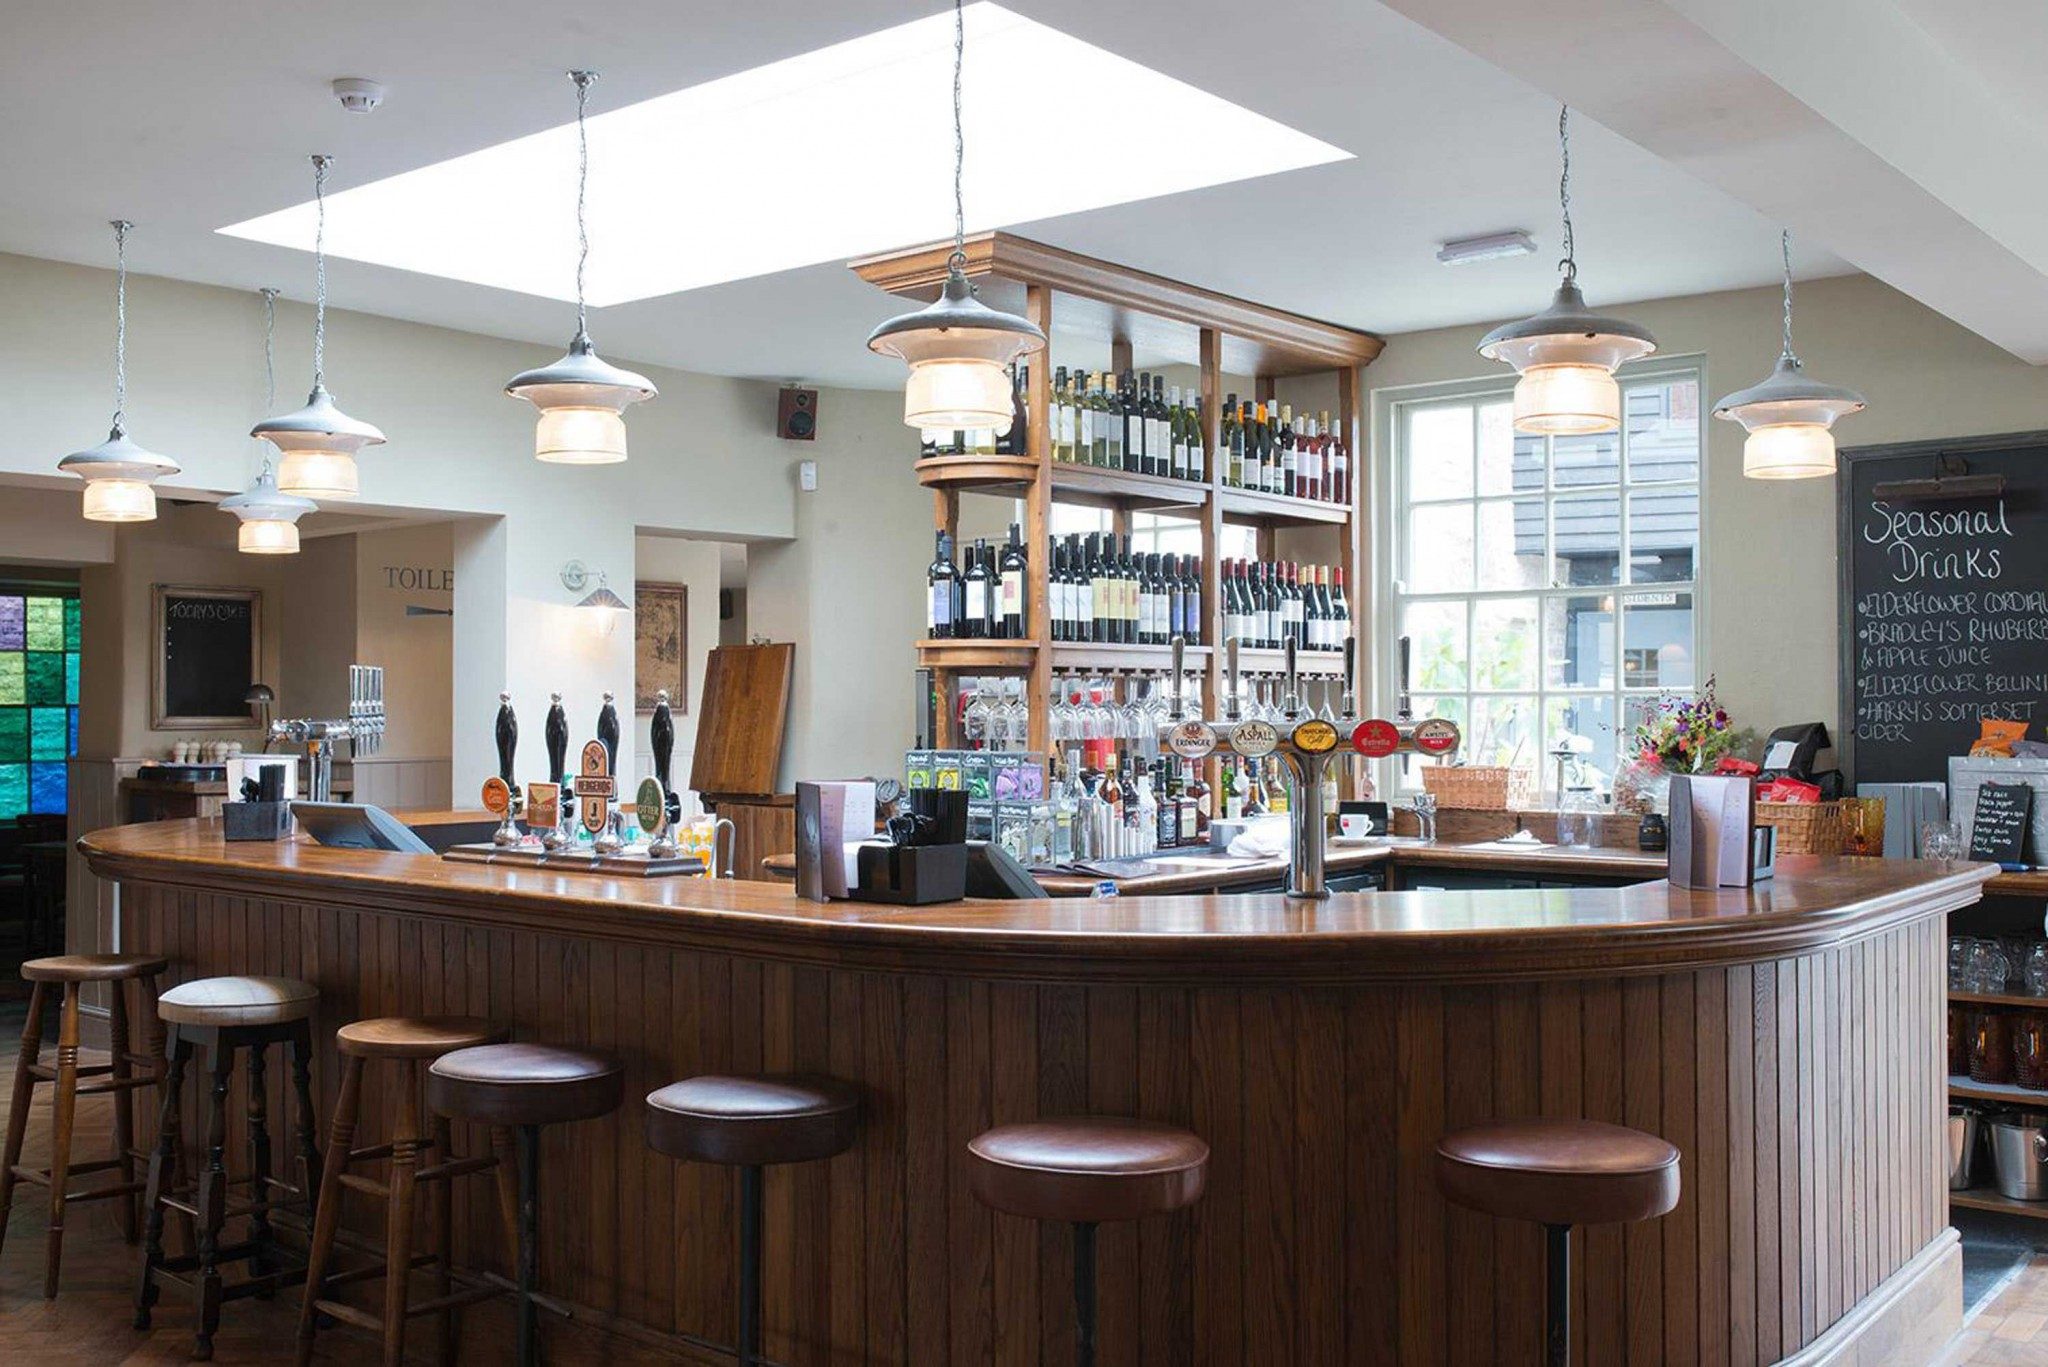 mackenzie wheeler are pub architects and interior designers based in shoreditch london specializing in conservation and listed building restoration